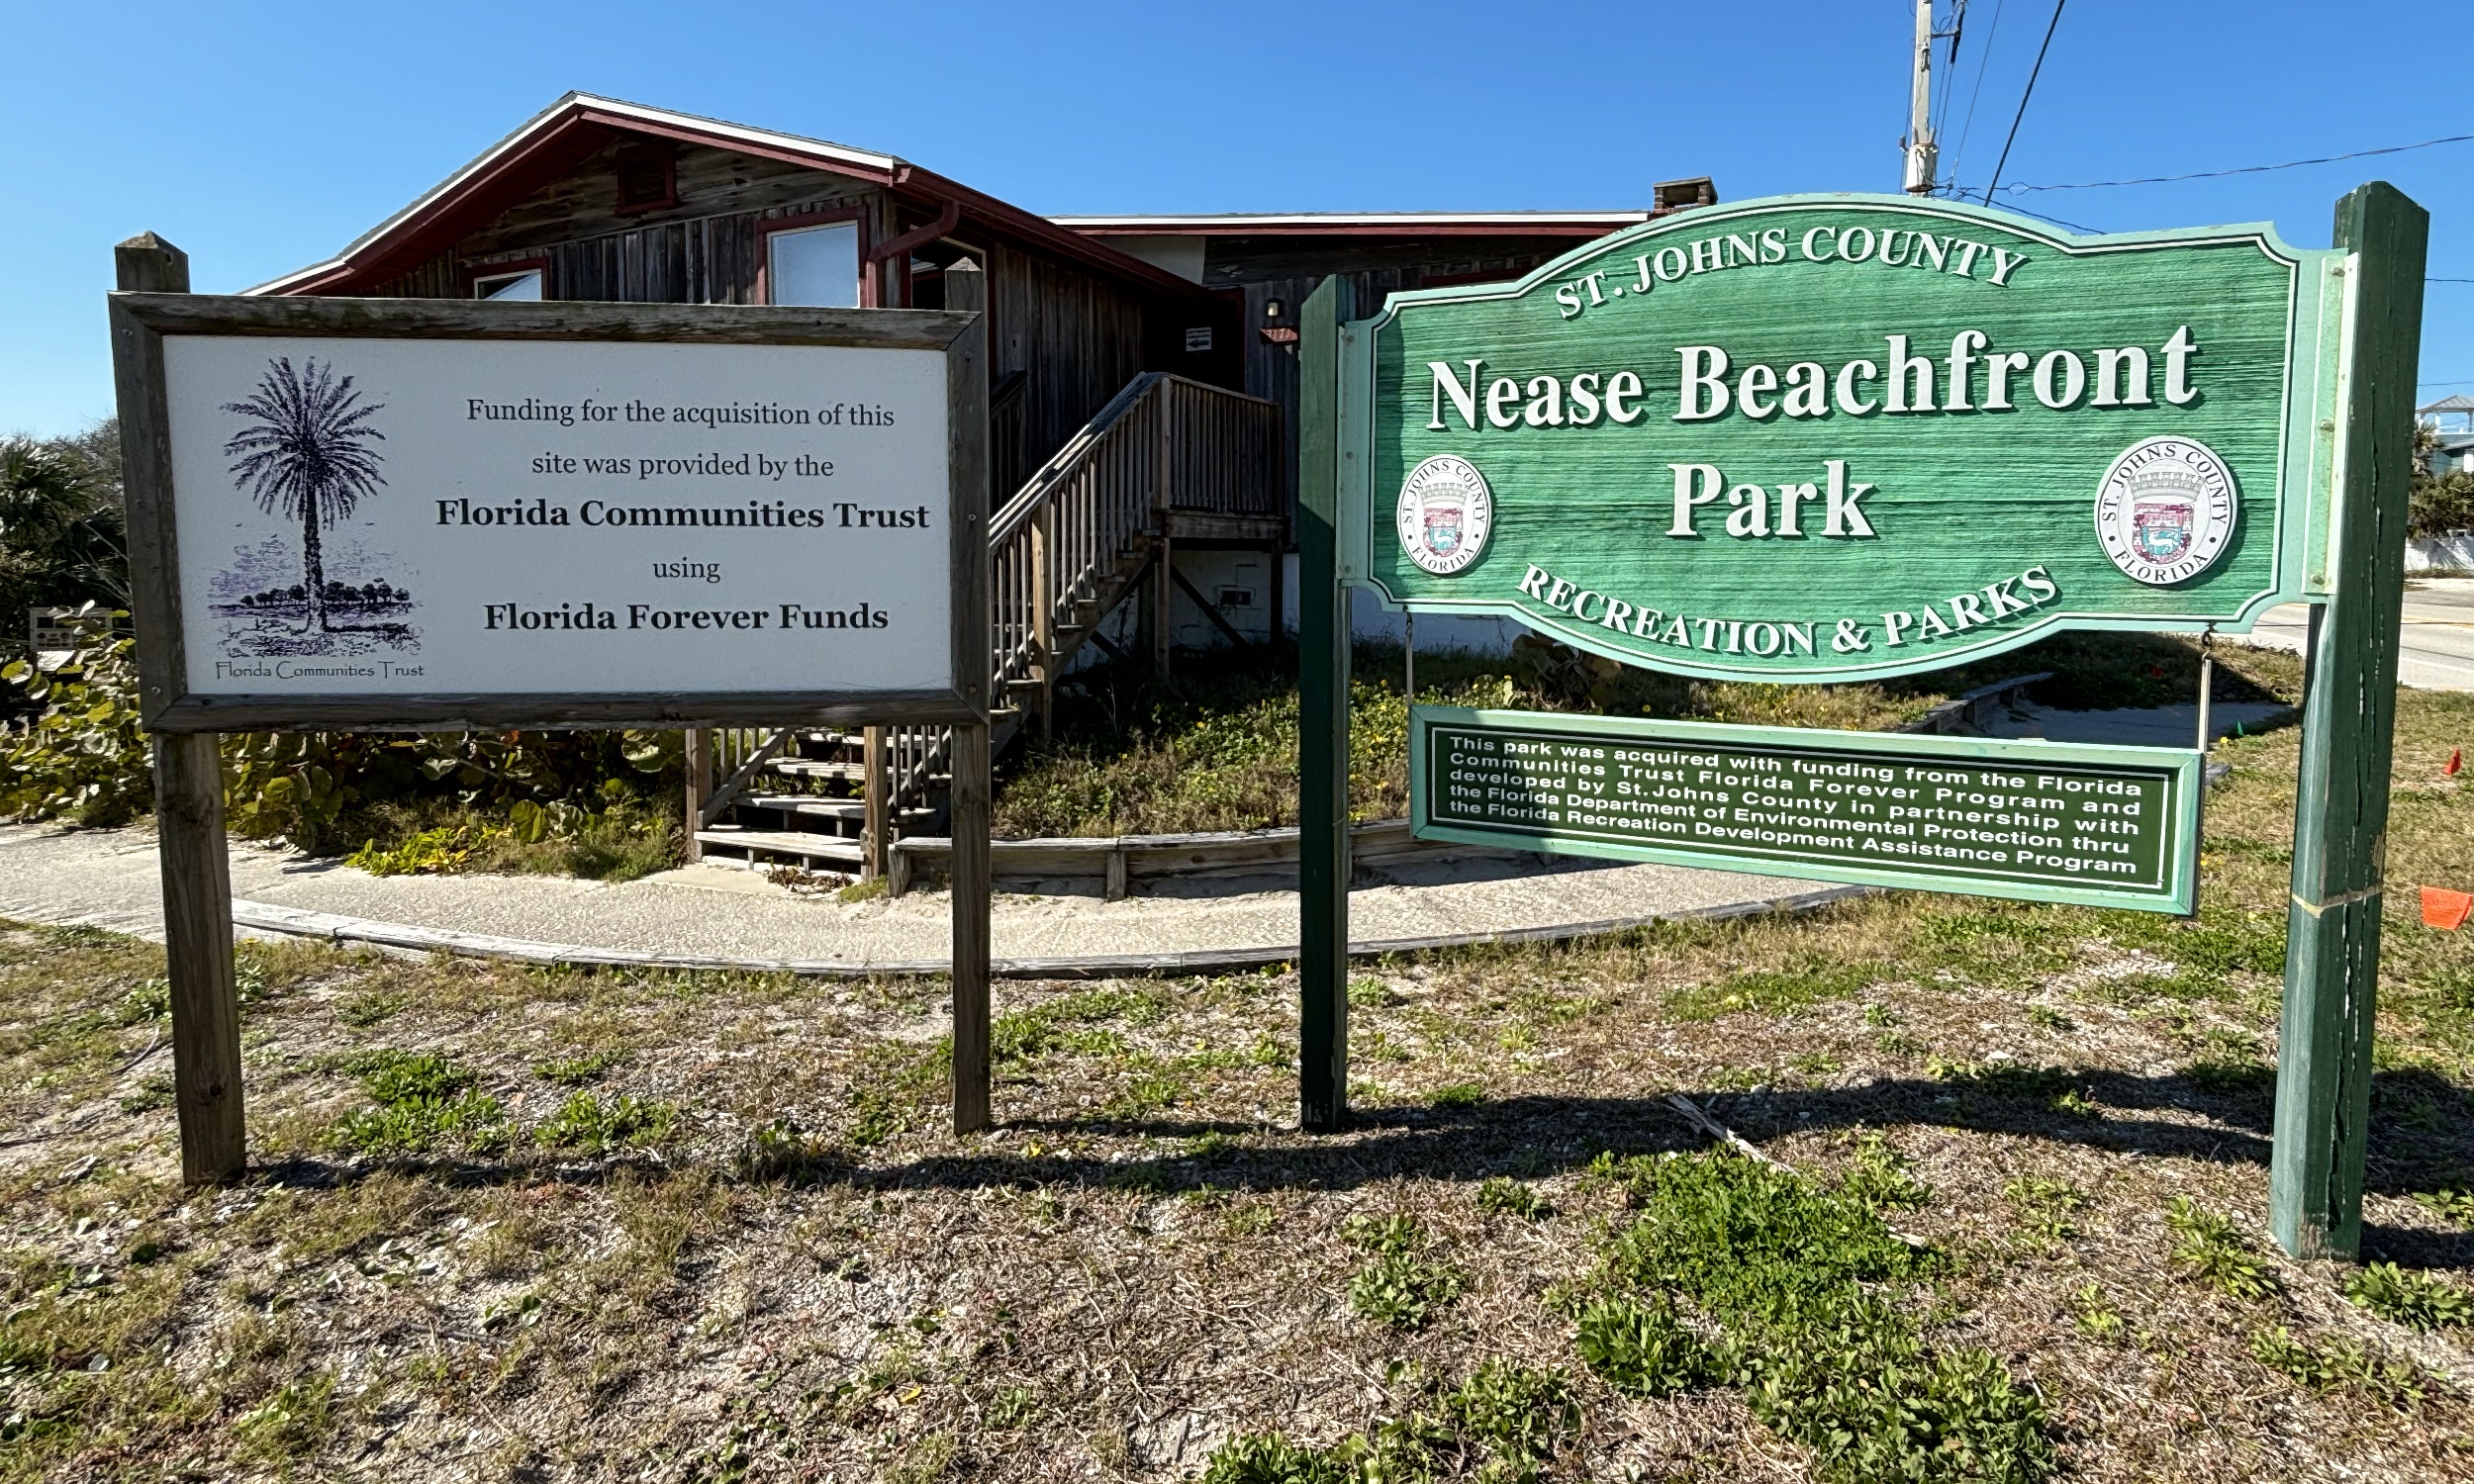 The Nease Beachfront Park sign